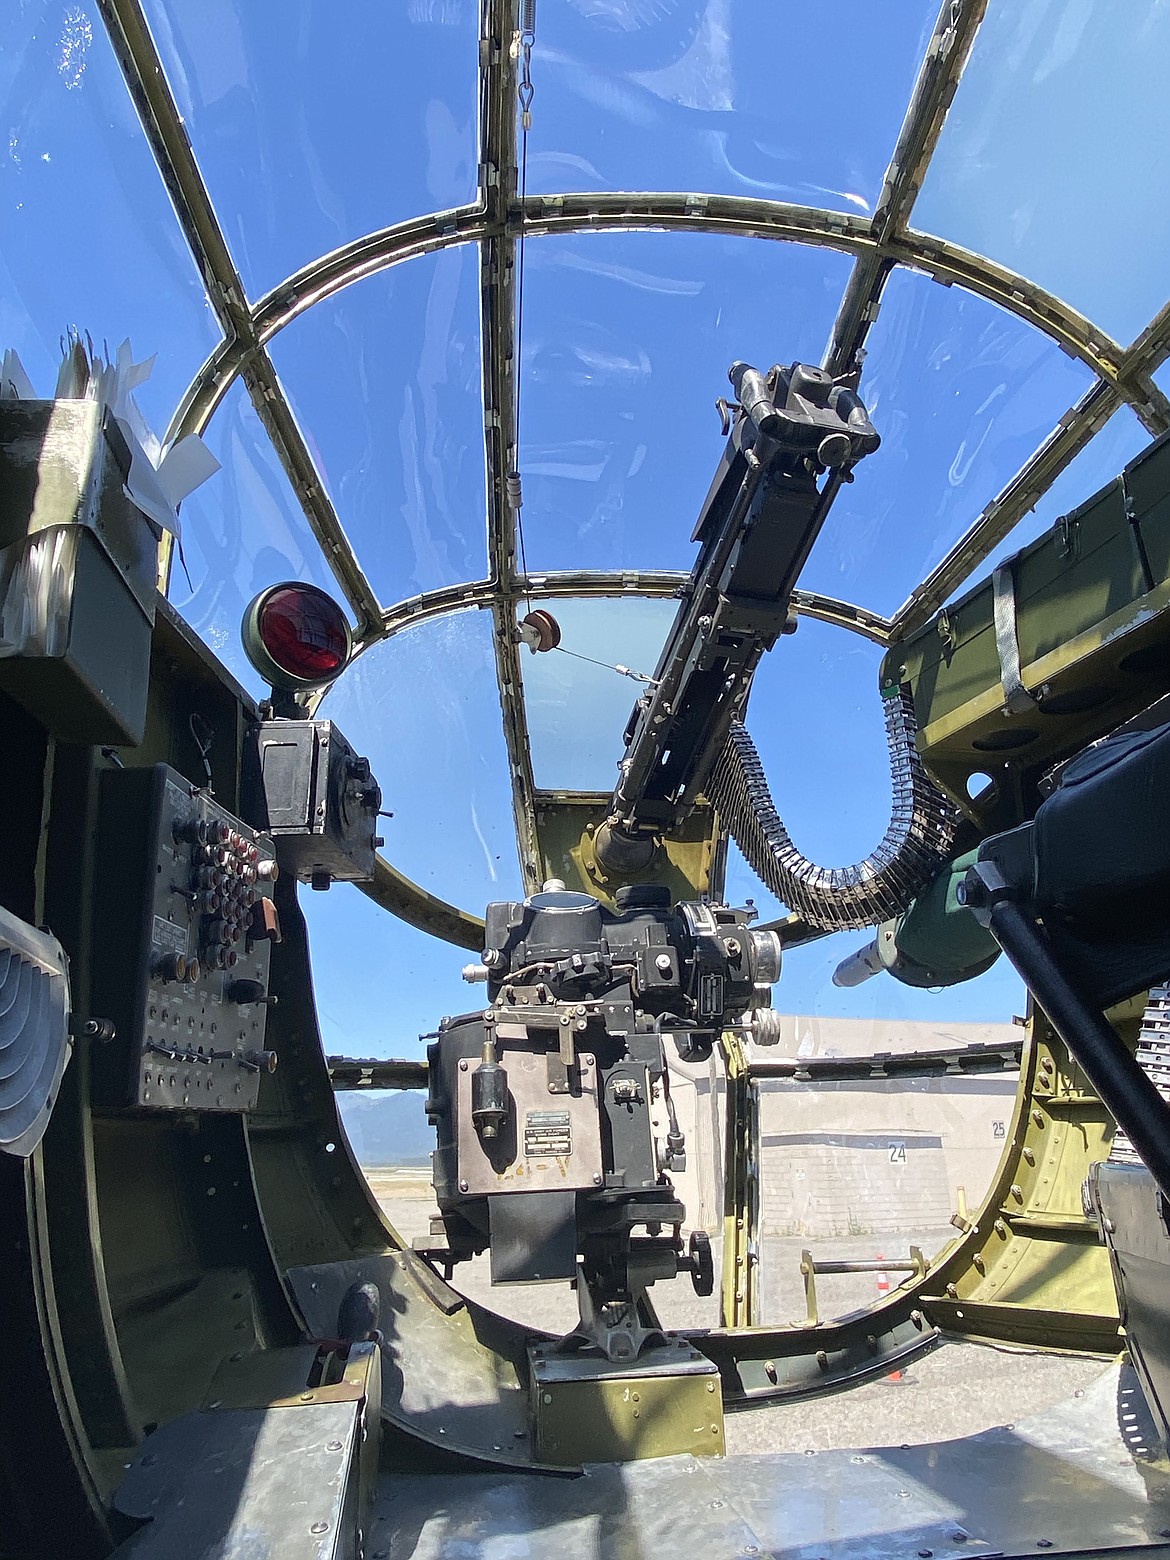 The view out of the World War II B-25J Mitchell warplane the "Maid in the Shade" nose featuring the front gunman position.  (MADISON HARDY/Press)